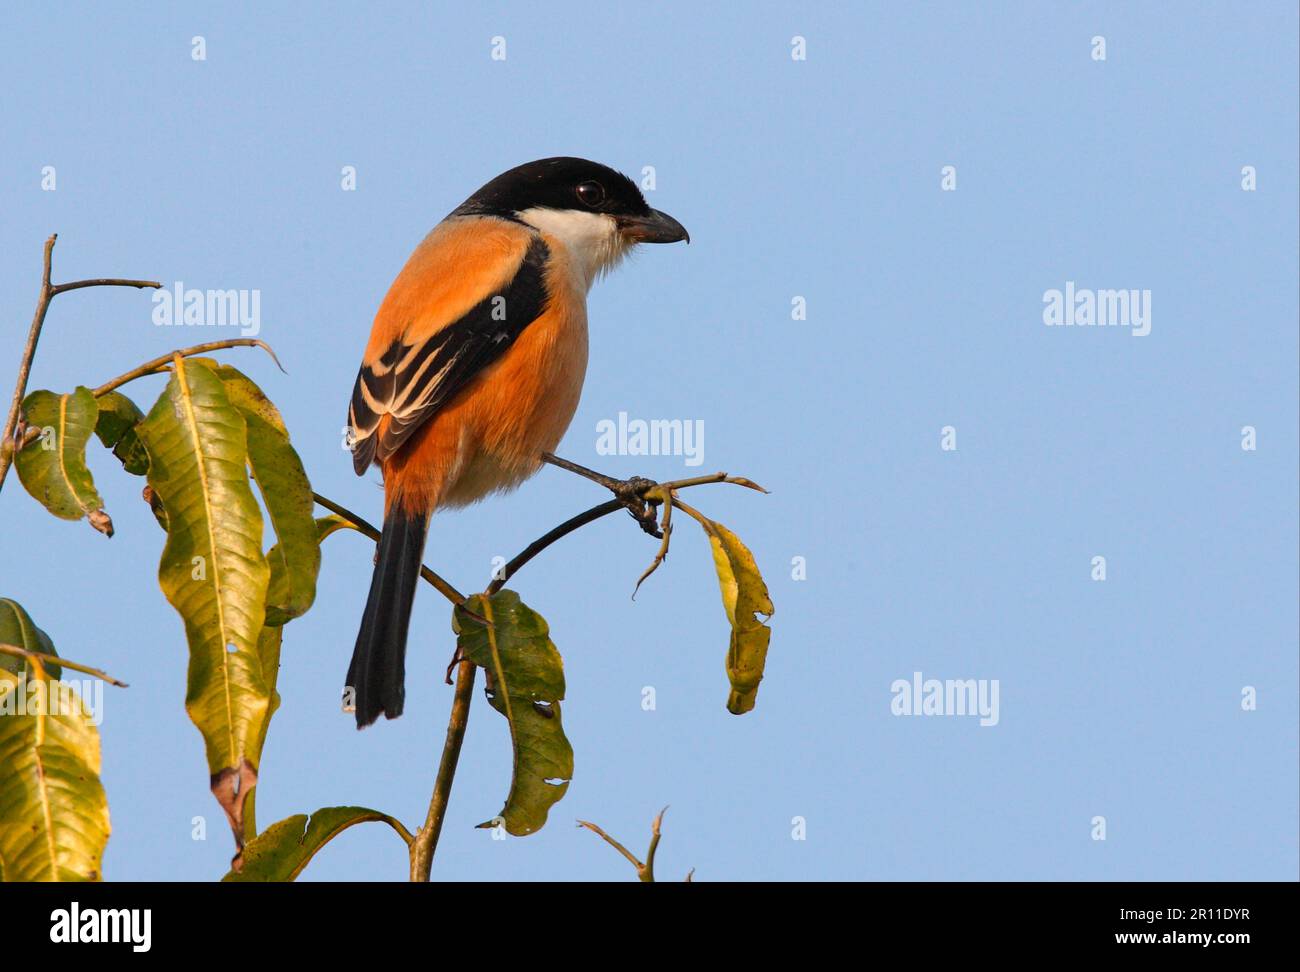 Chess Shrike, songbirds, animals, birds, Long-tailed Shrike (Lanius schach tricolor) adult, perched in tree, Chitwan, Nepal Stock Photo